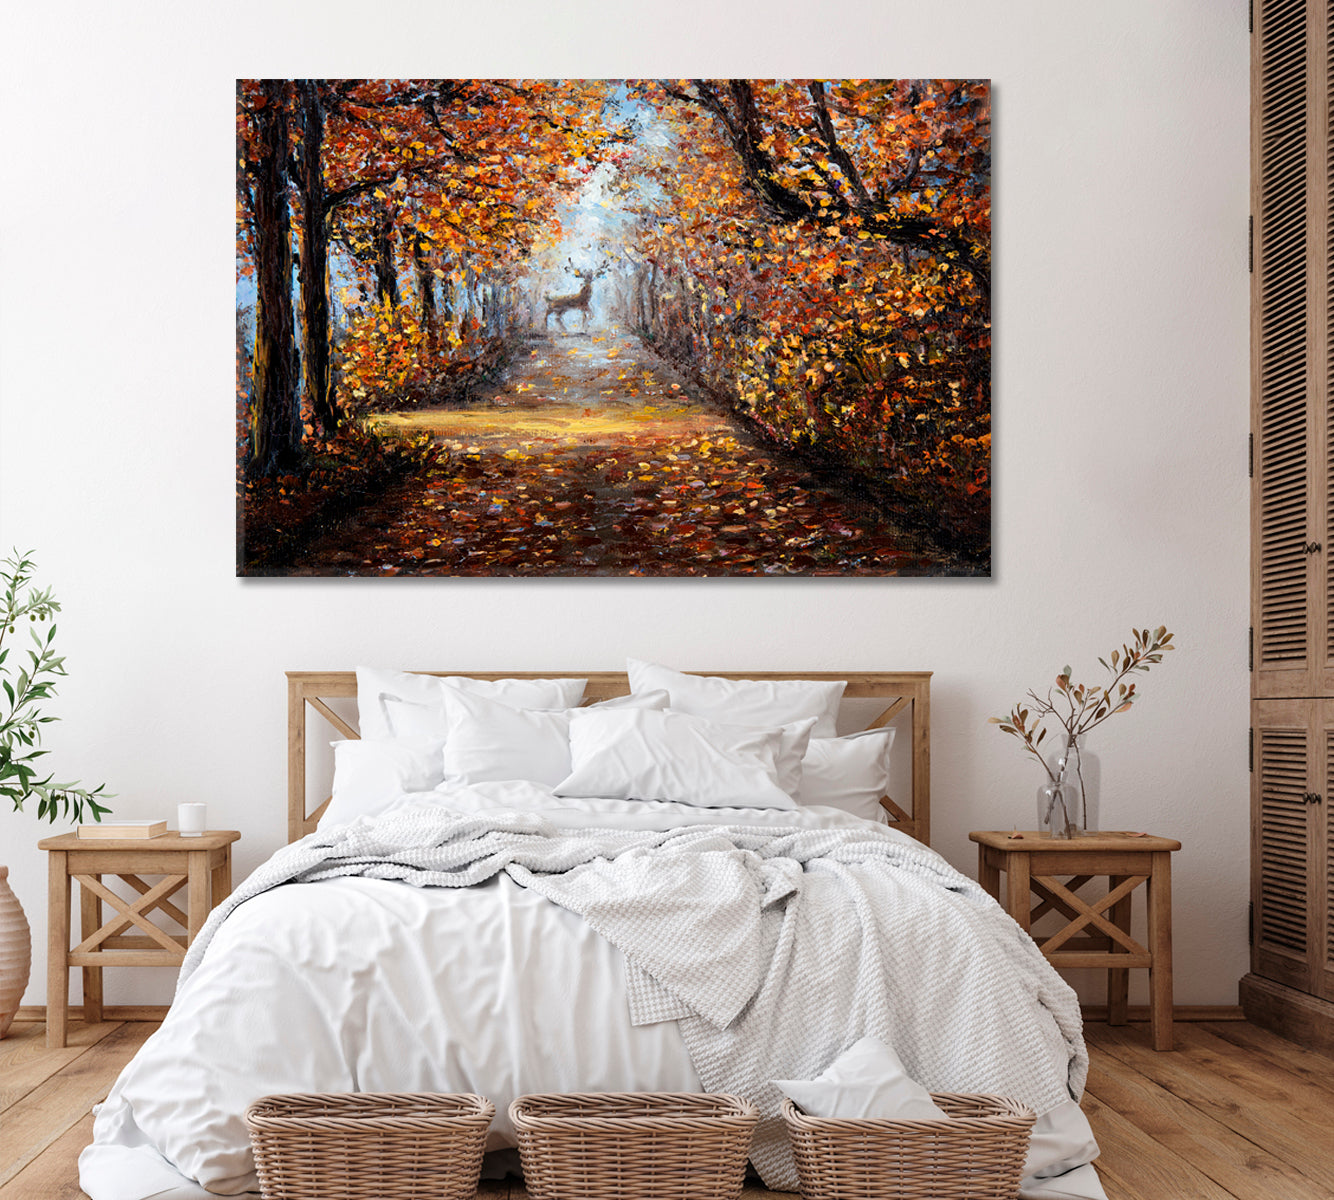 Deer in Autumn Forest Canvas Print ArtLexy 1 Panel 24"x16" inches 